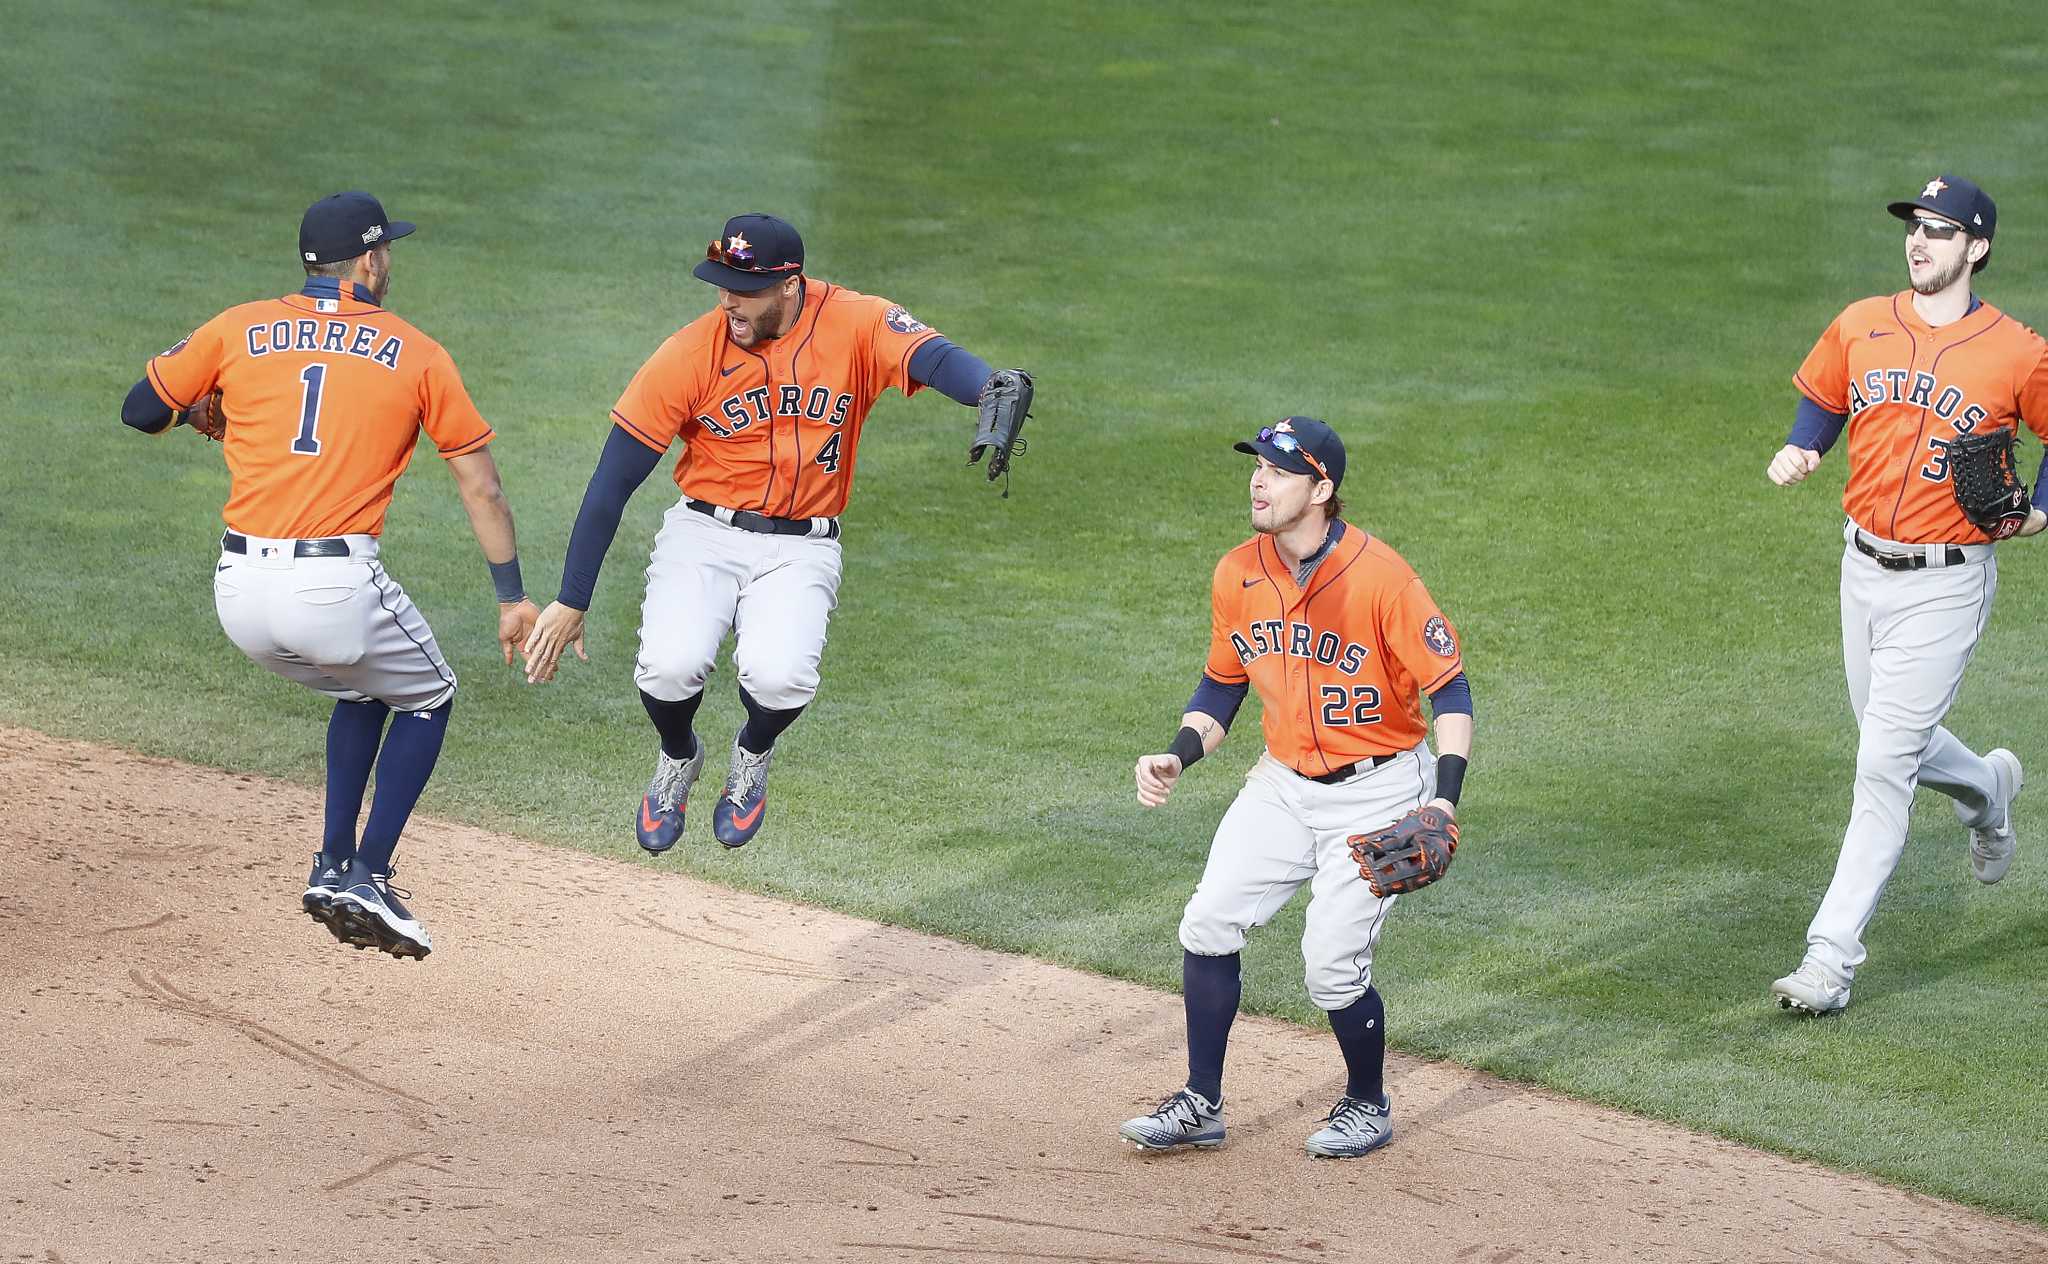 Astros insider Playoff experience shows in Game 1 victory over Twins